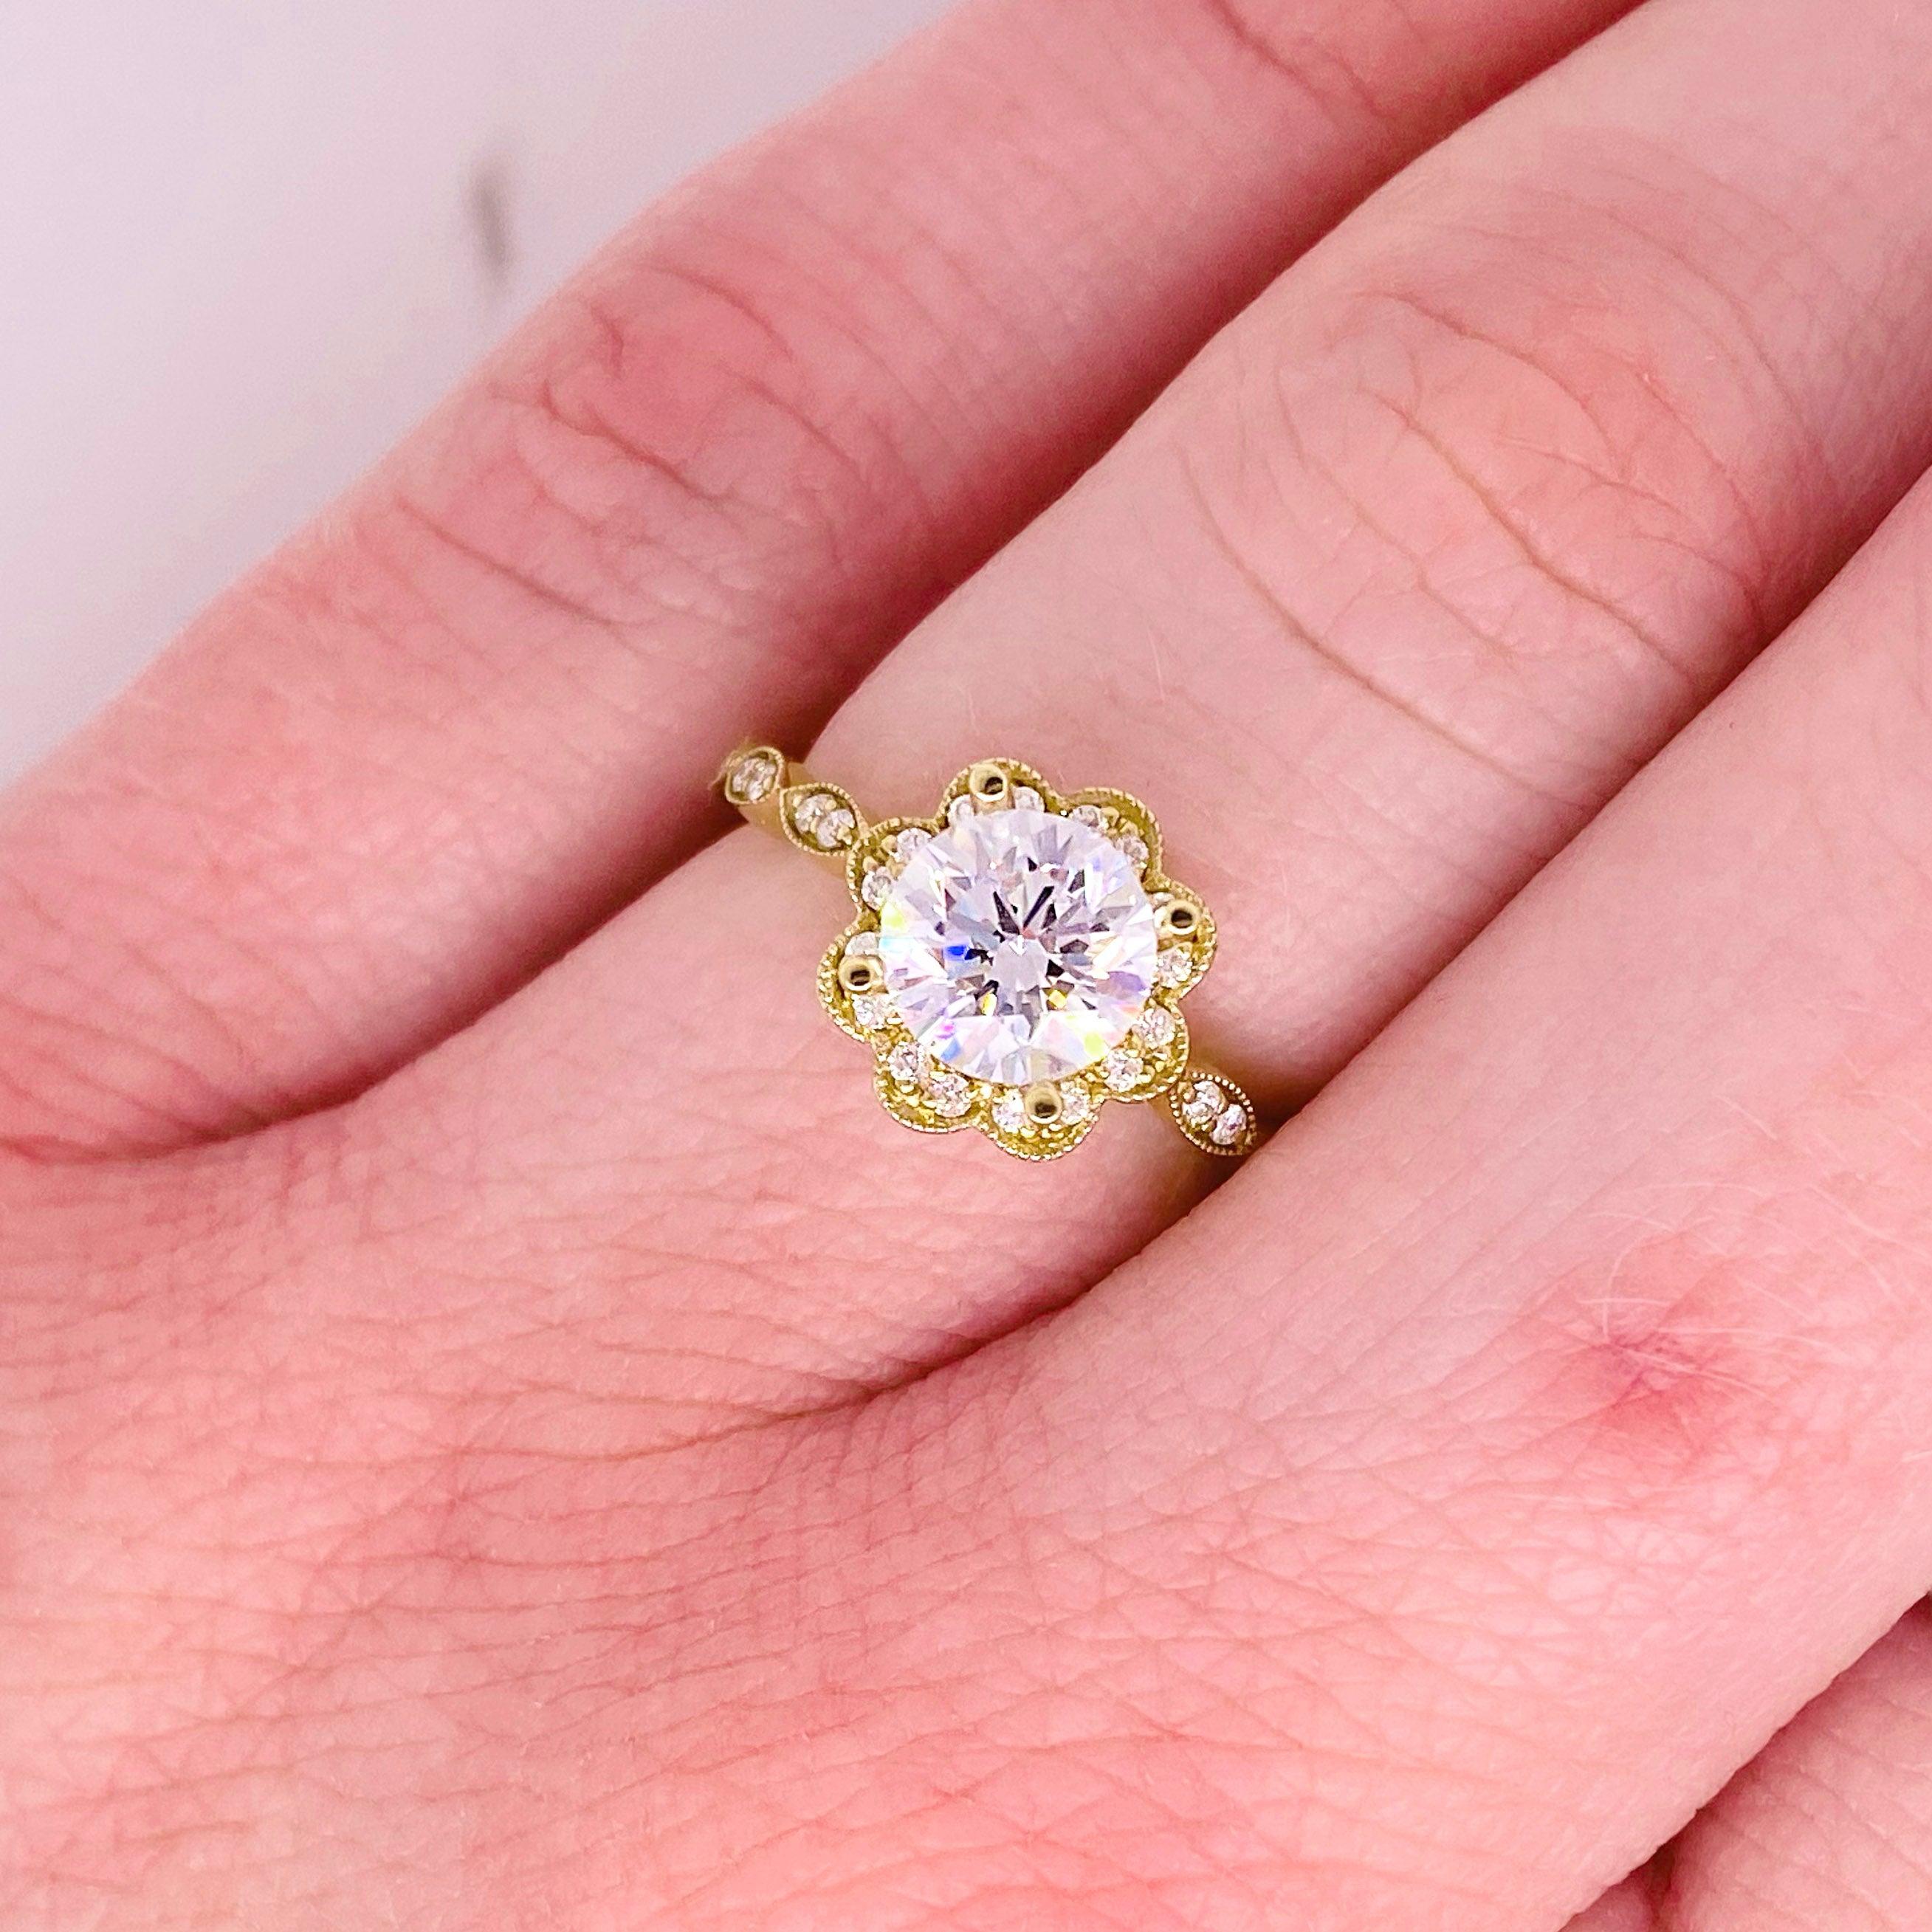 For Sale:  One Carat Diamond Engagement Ring, Flower Halo, Yellow Gold, Nature Inspired 2